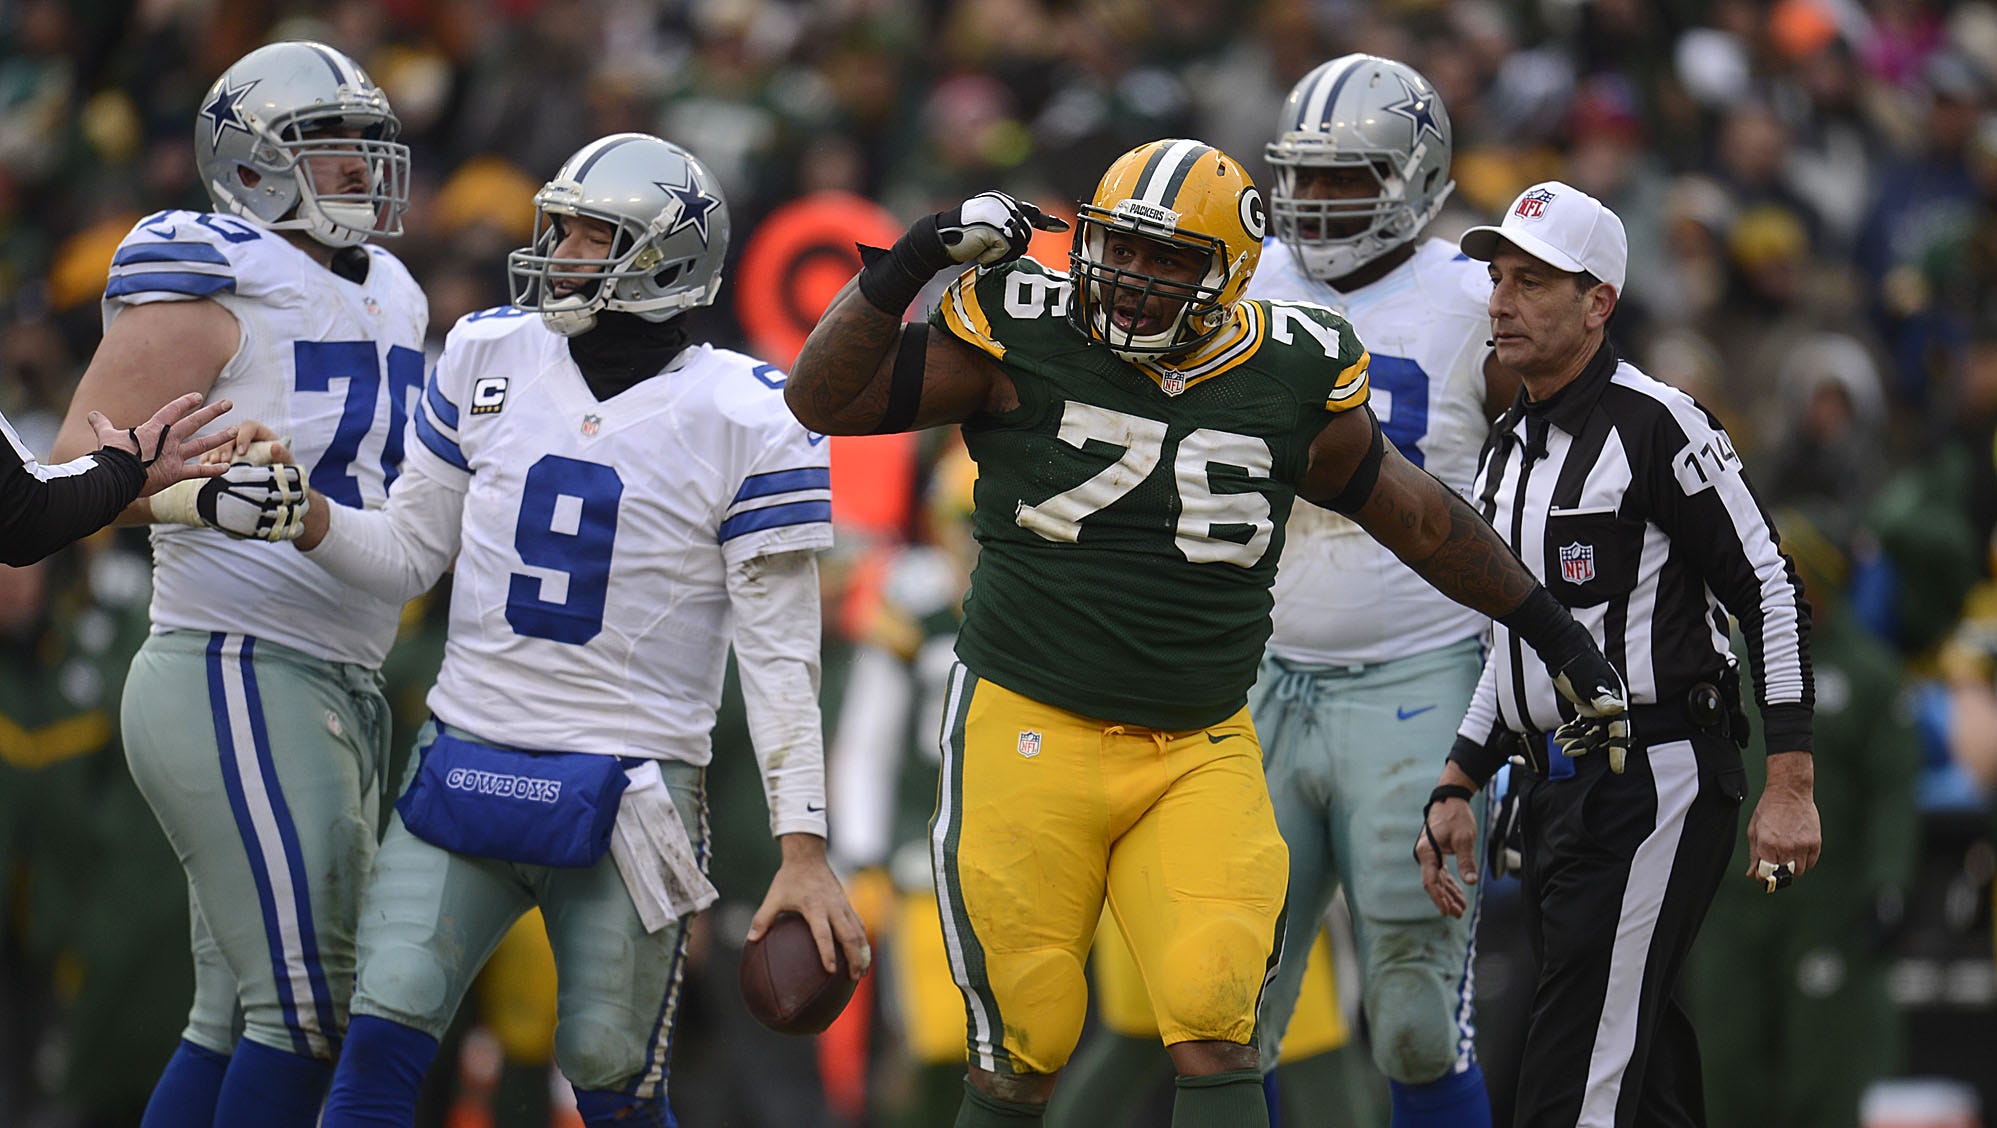 Green Bay Packers defensive tackle Mike Daniels celebrates after the Packers sacked Dallas Cowboys quarterback Tony Romo (9) during an NFC divisional playoff game at Lambeau Field.